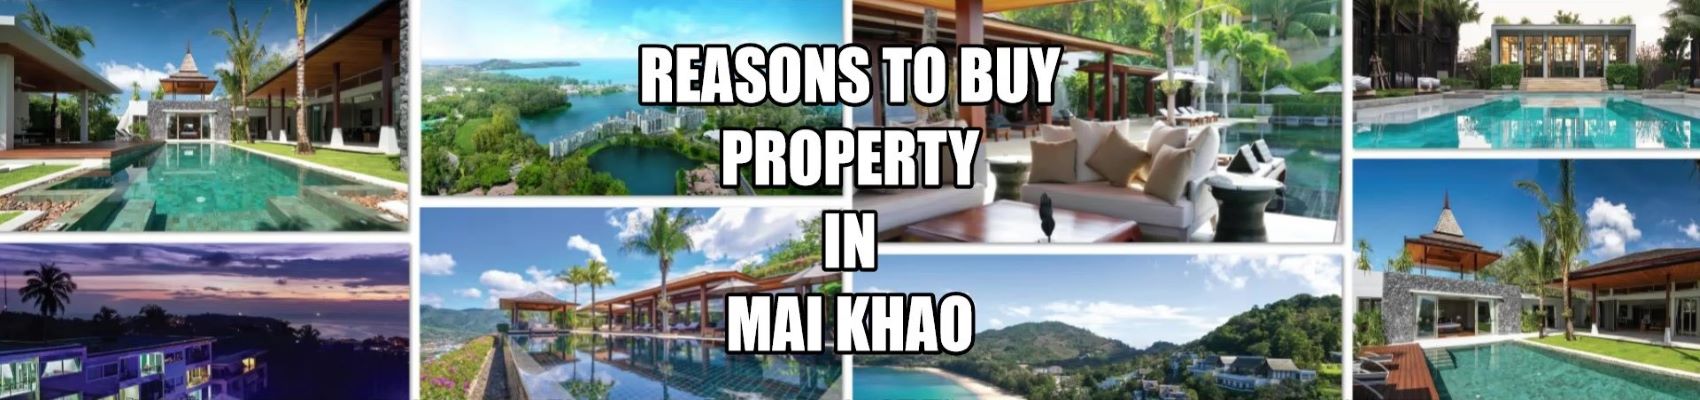 Tips to purchase property in Mai Khao